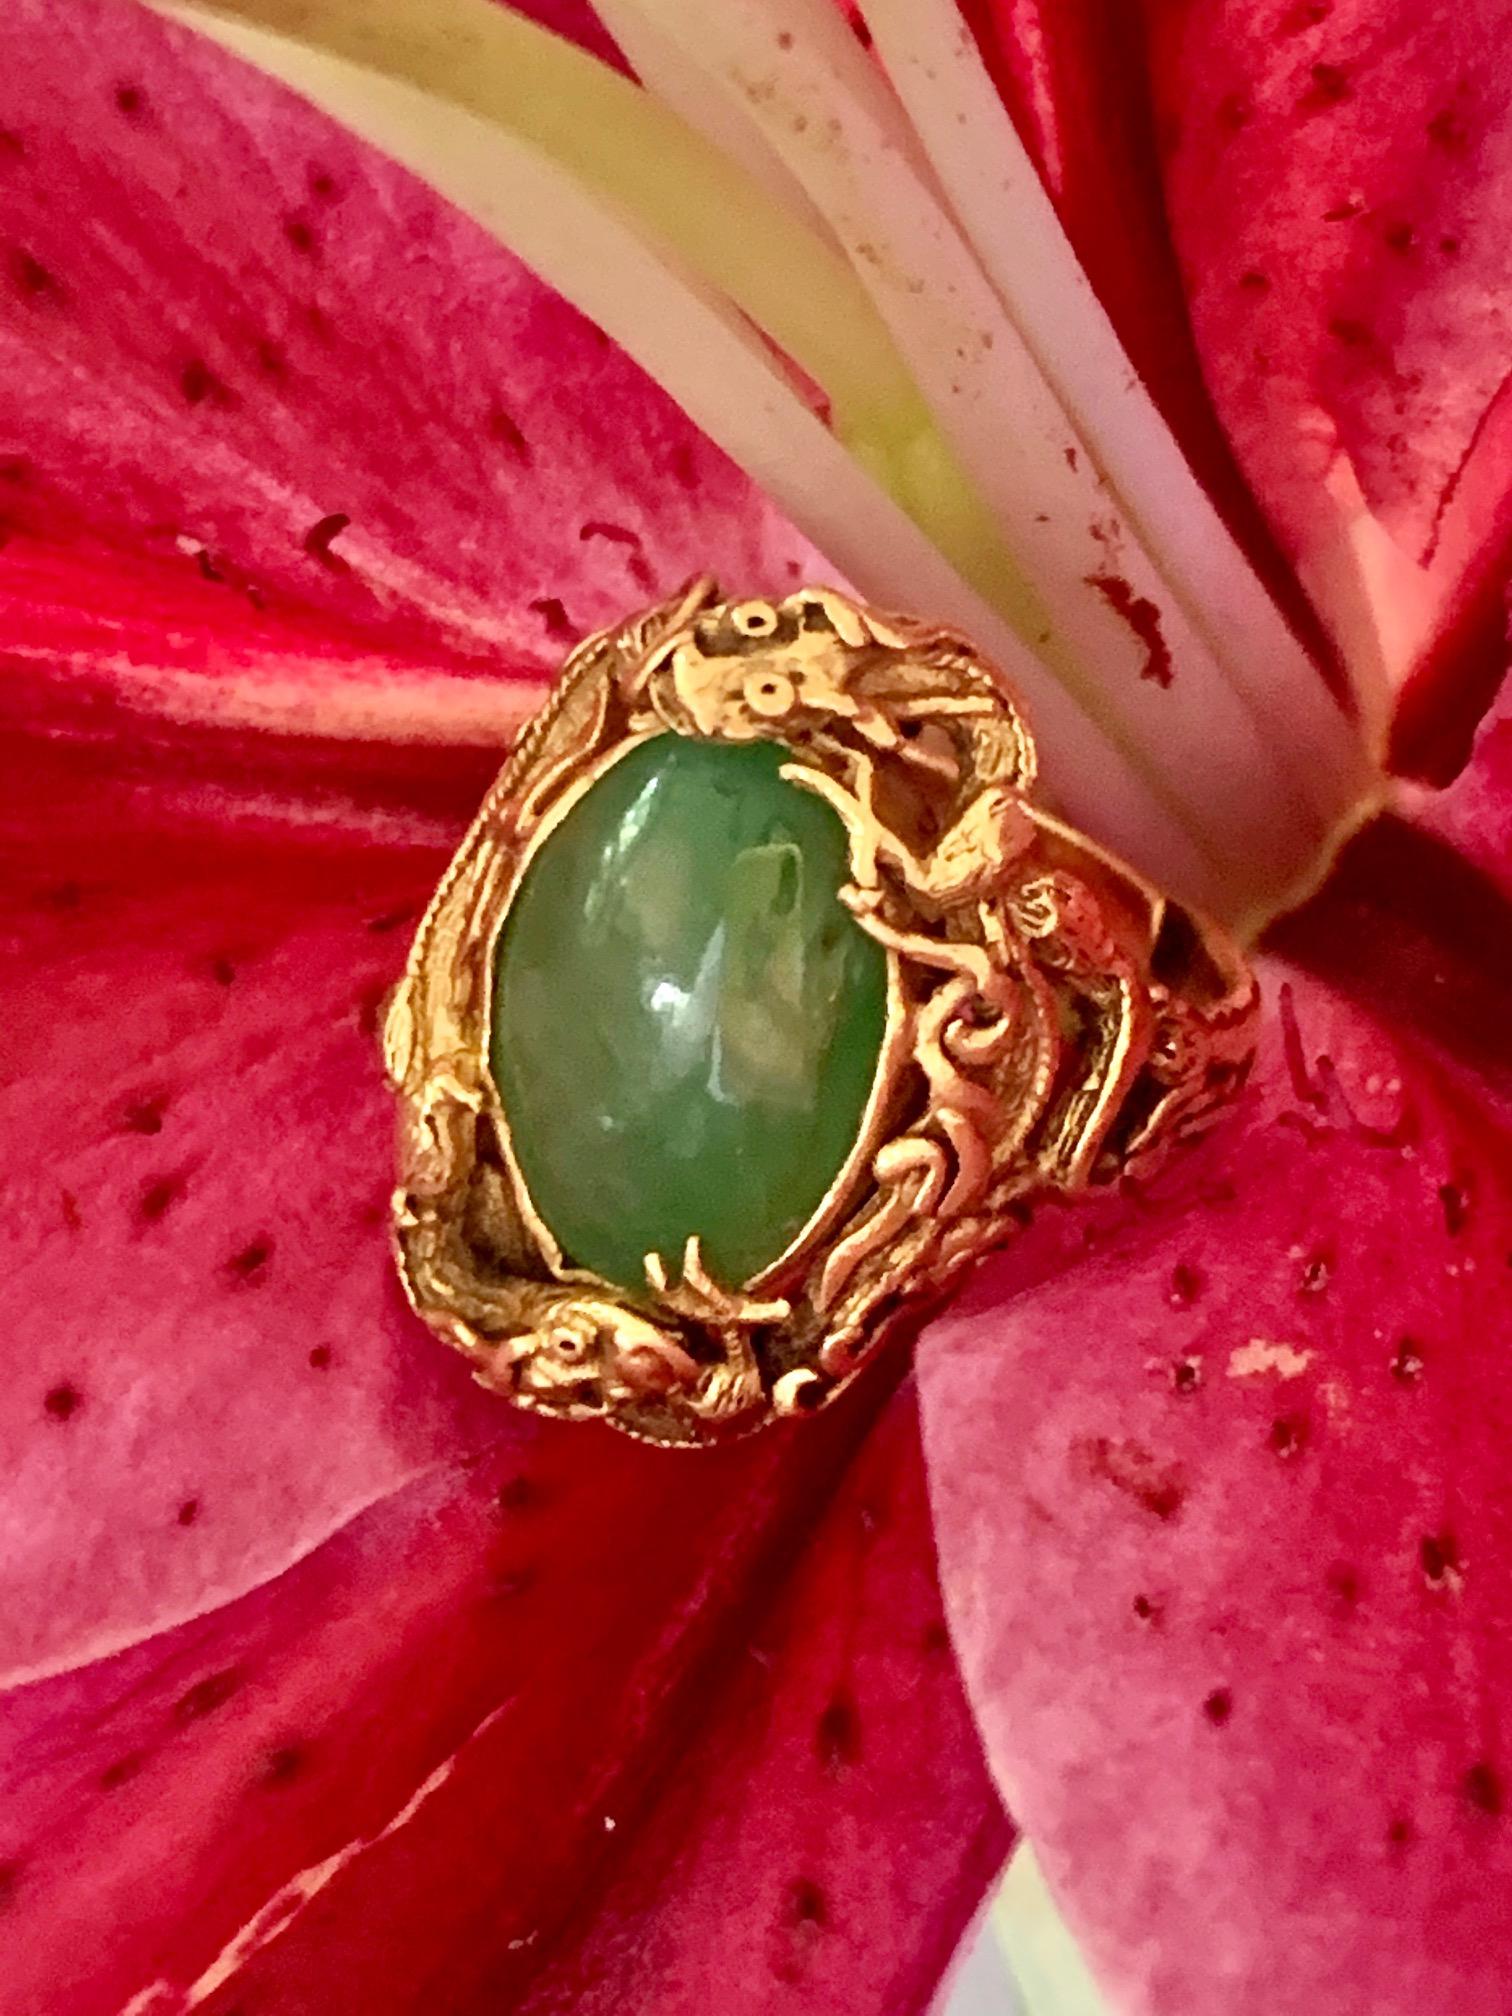 This vintage, dragon motif 22 kart yellow Gold ring, features a large, polished cabochon Jadeite stone.  The dragons are circling this beautiful stone.  
This ring is adjustable.
Stone Size: 14 x 10mm
Ring Size: 6
Weight: 10.1 grams